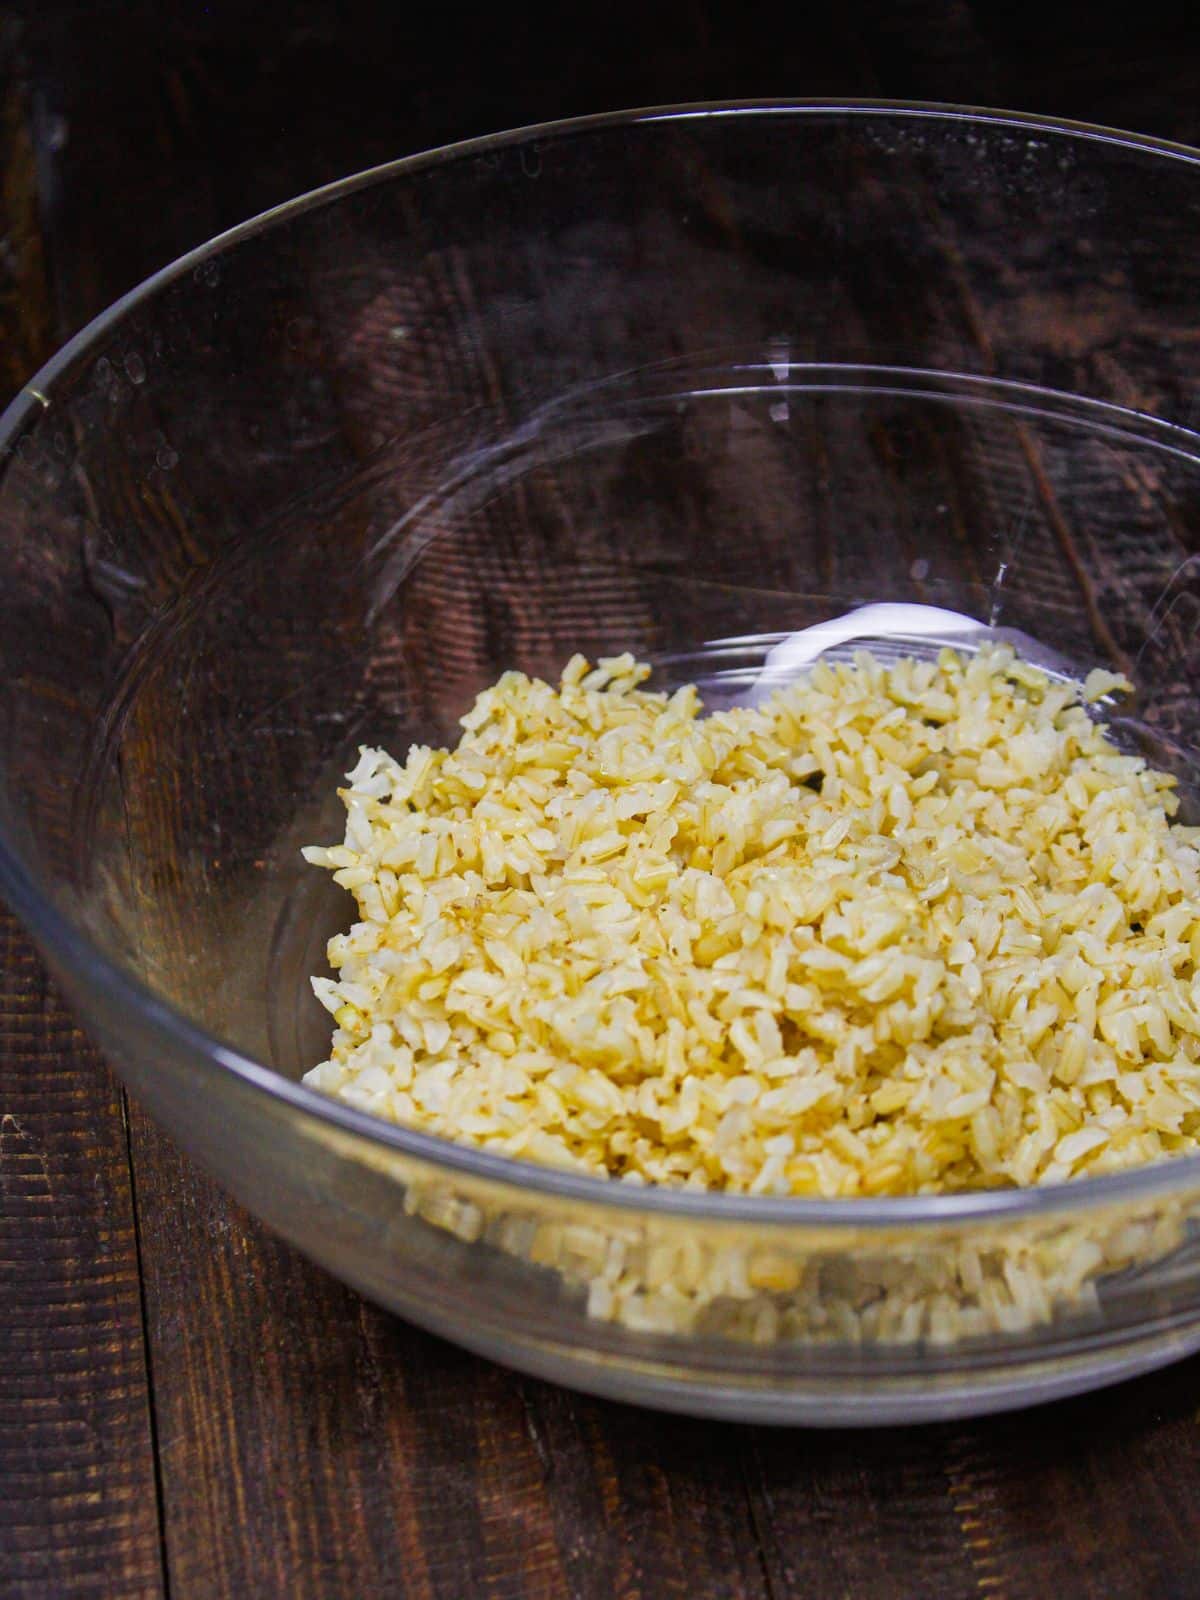 Take cooked brown rice into a bowl